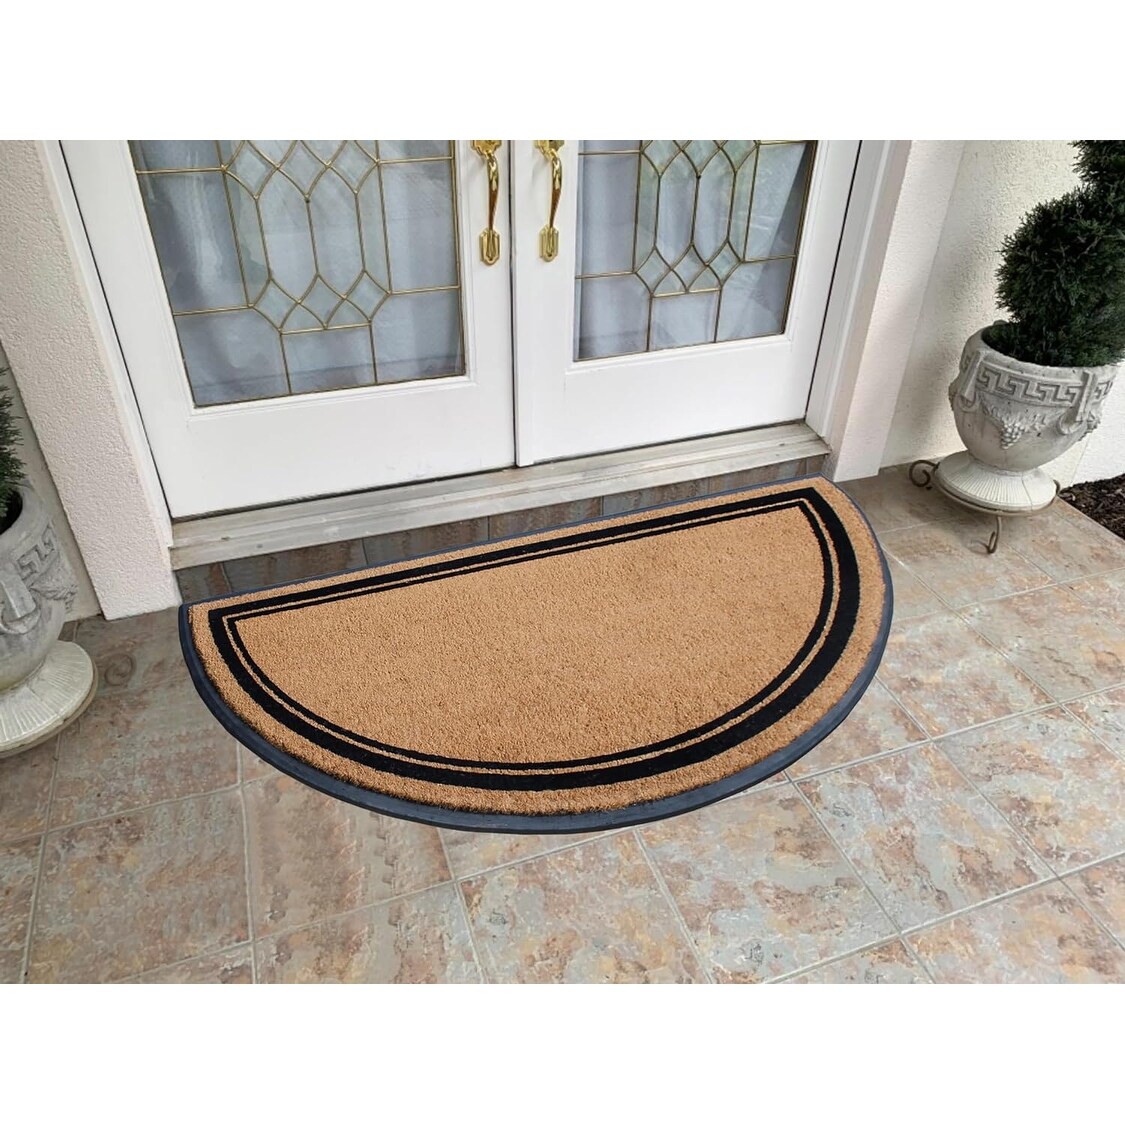 A1HC Natural Coir and Rubber Large Door Mat,Thick Durable Doormats for Indoor  Outdoor Entrance - Bed Bath & Beyond - 37747143